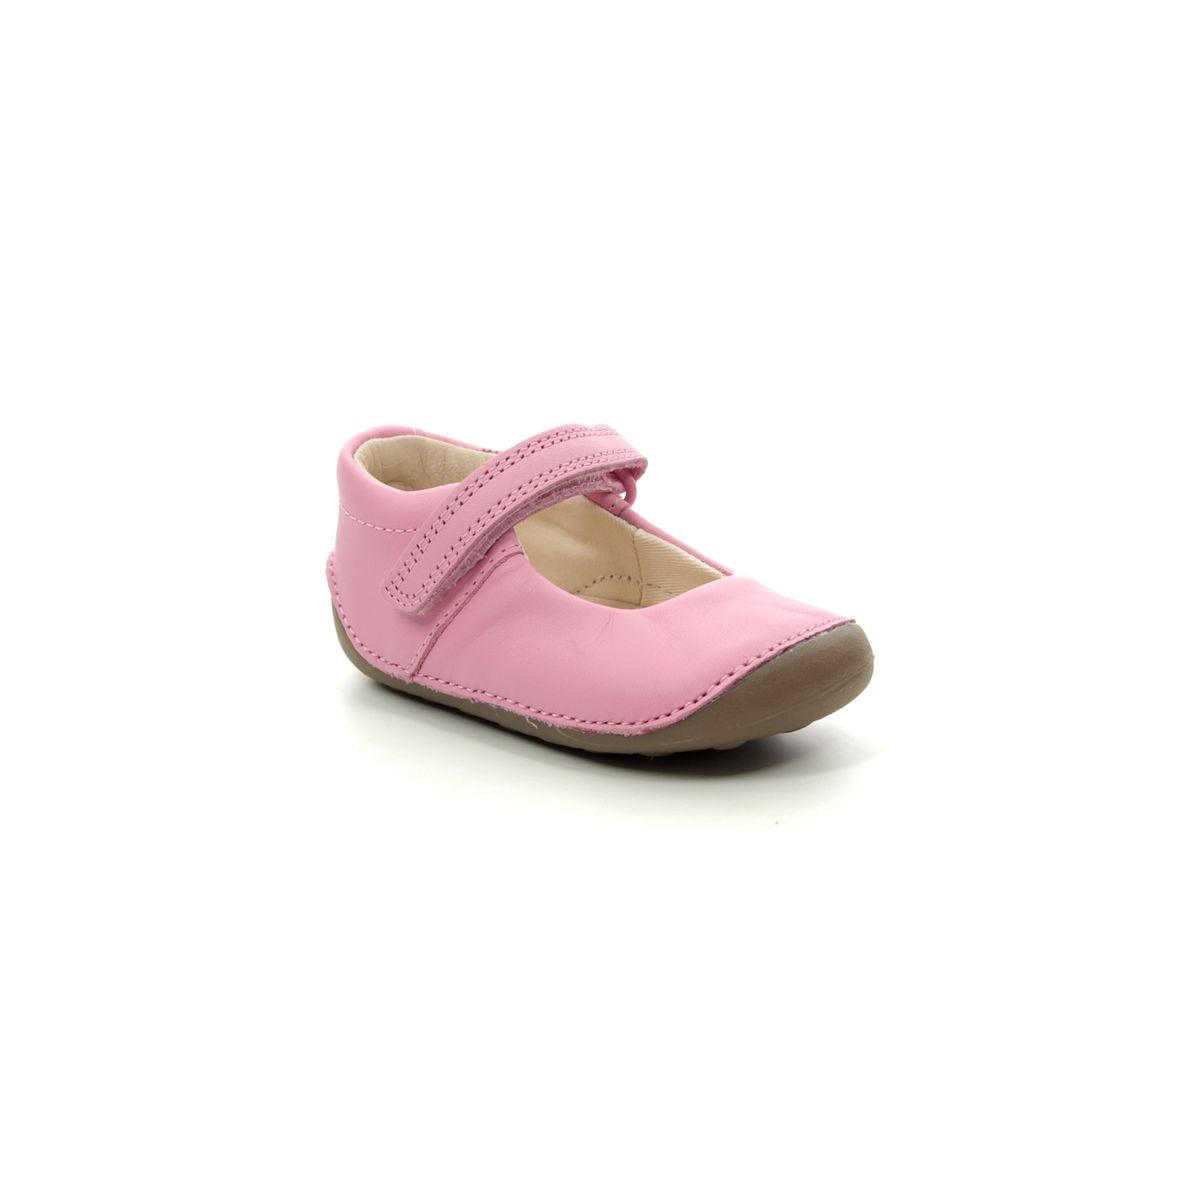 ikke Forsendelse Vedhæftet fil Clarks Tiny Mist T G Fit Pink Leather girls first and baby shoes